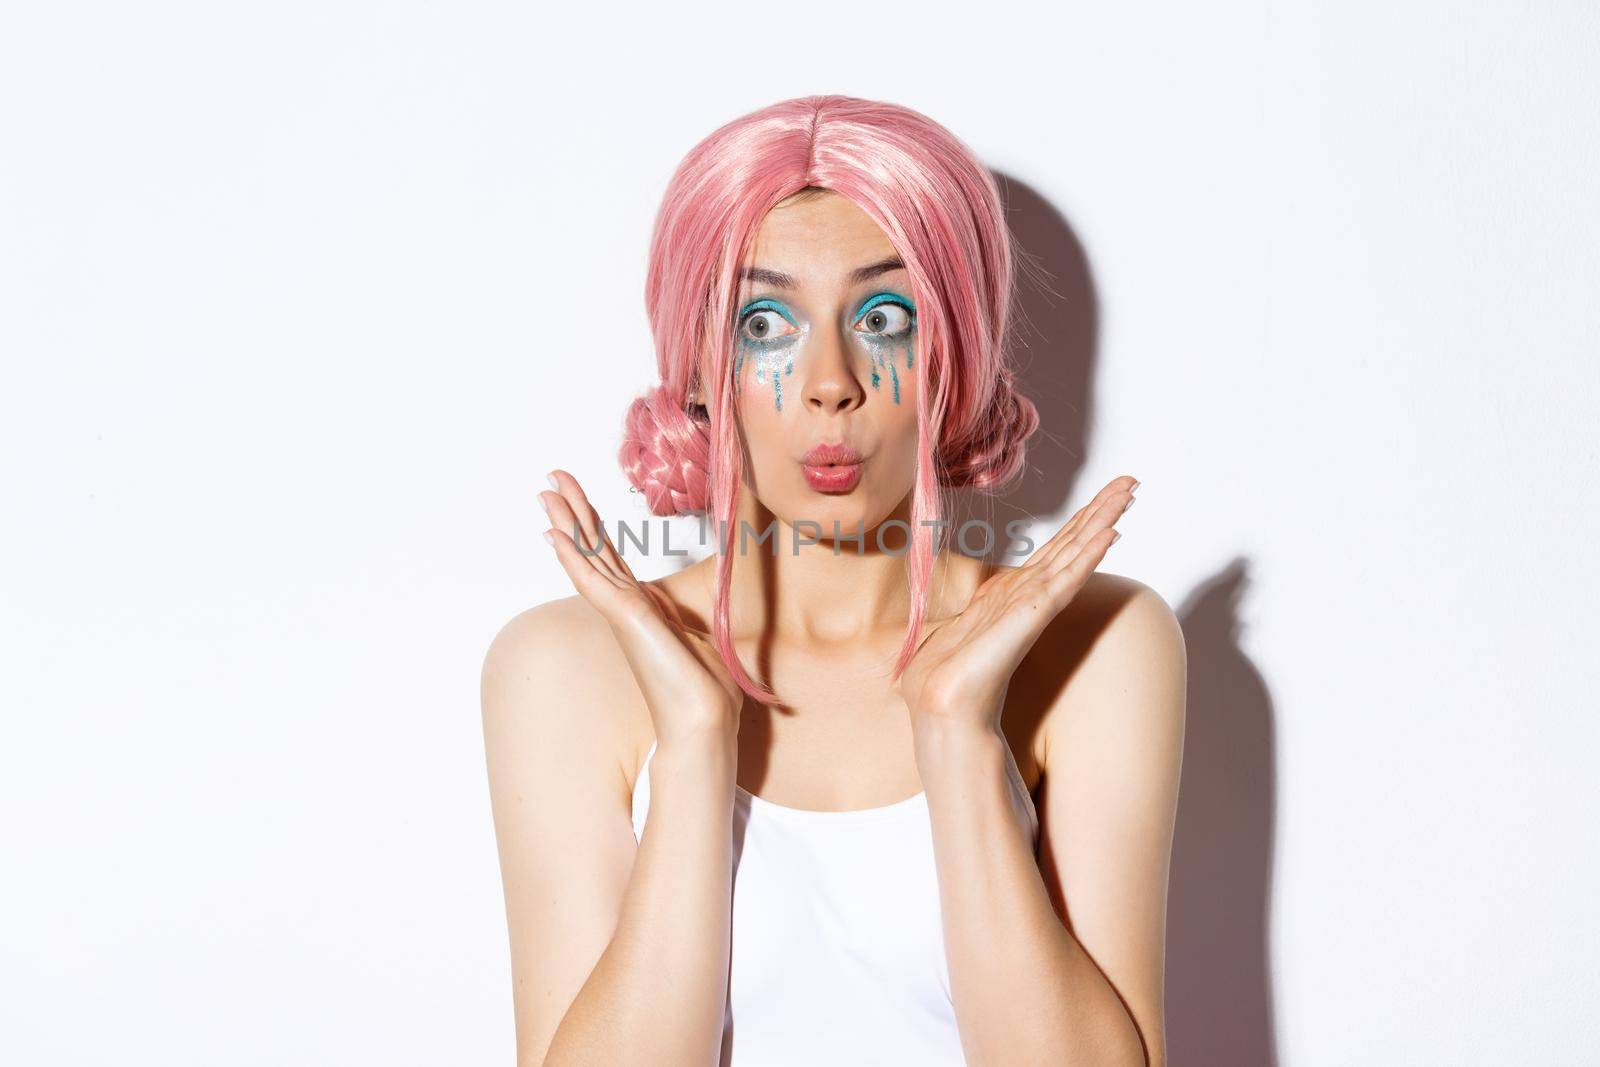 Close-up of excited party girl in pink wig and bright makeup looking impressed, smiling and gazing surprised, standing over white background.